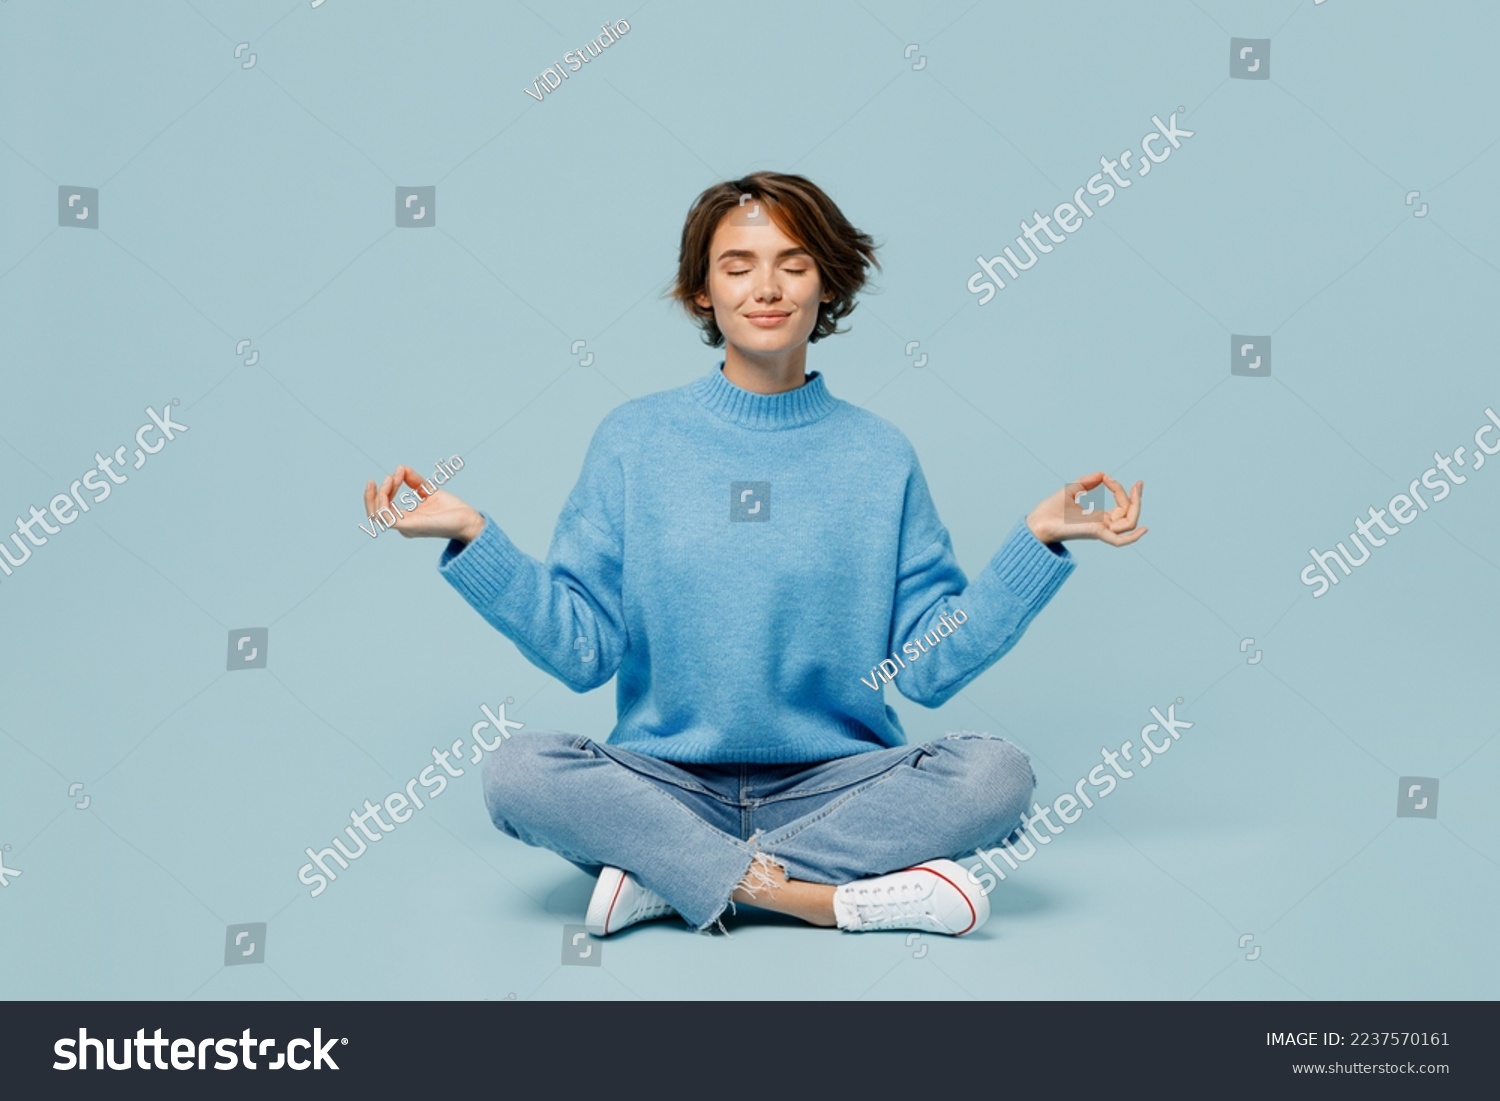 Full body young woman wear knitted sweater holding spreading hands in yoga om aum gesture relax meditate try to calm downisolated on plain pastel light blue cyan background. People lifestyle concept #2237570161